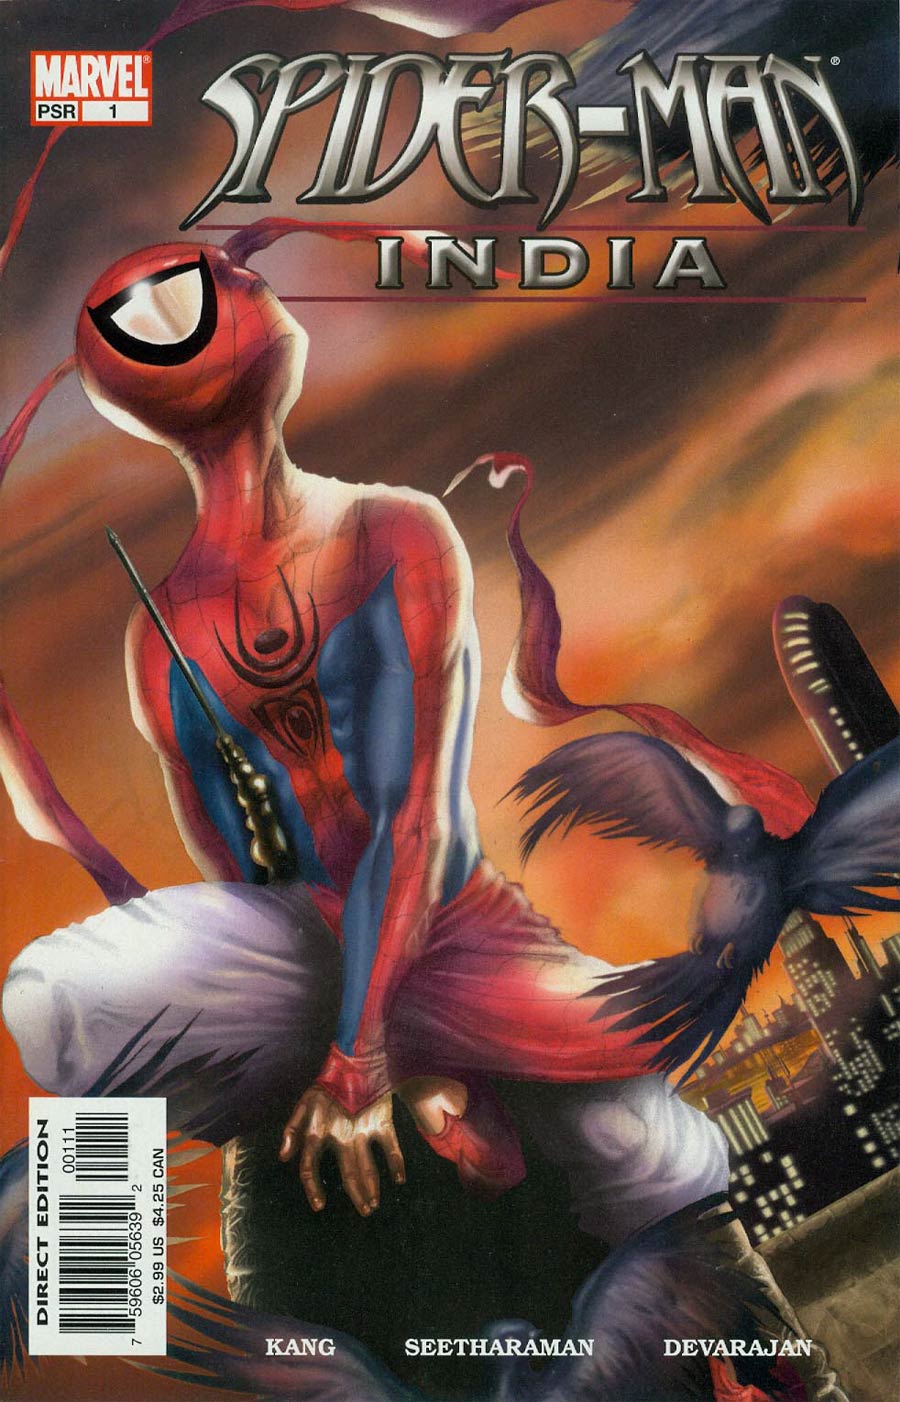 Spider-Man India #1 Cover A